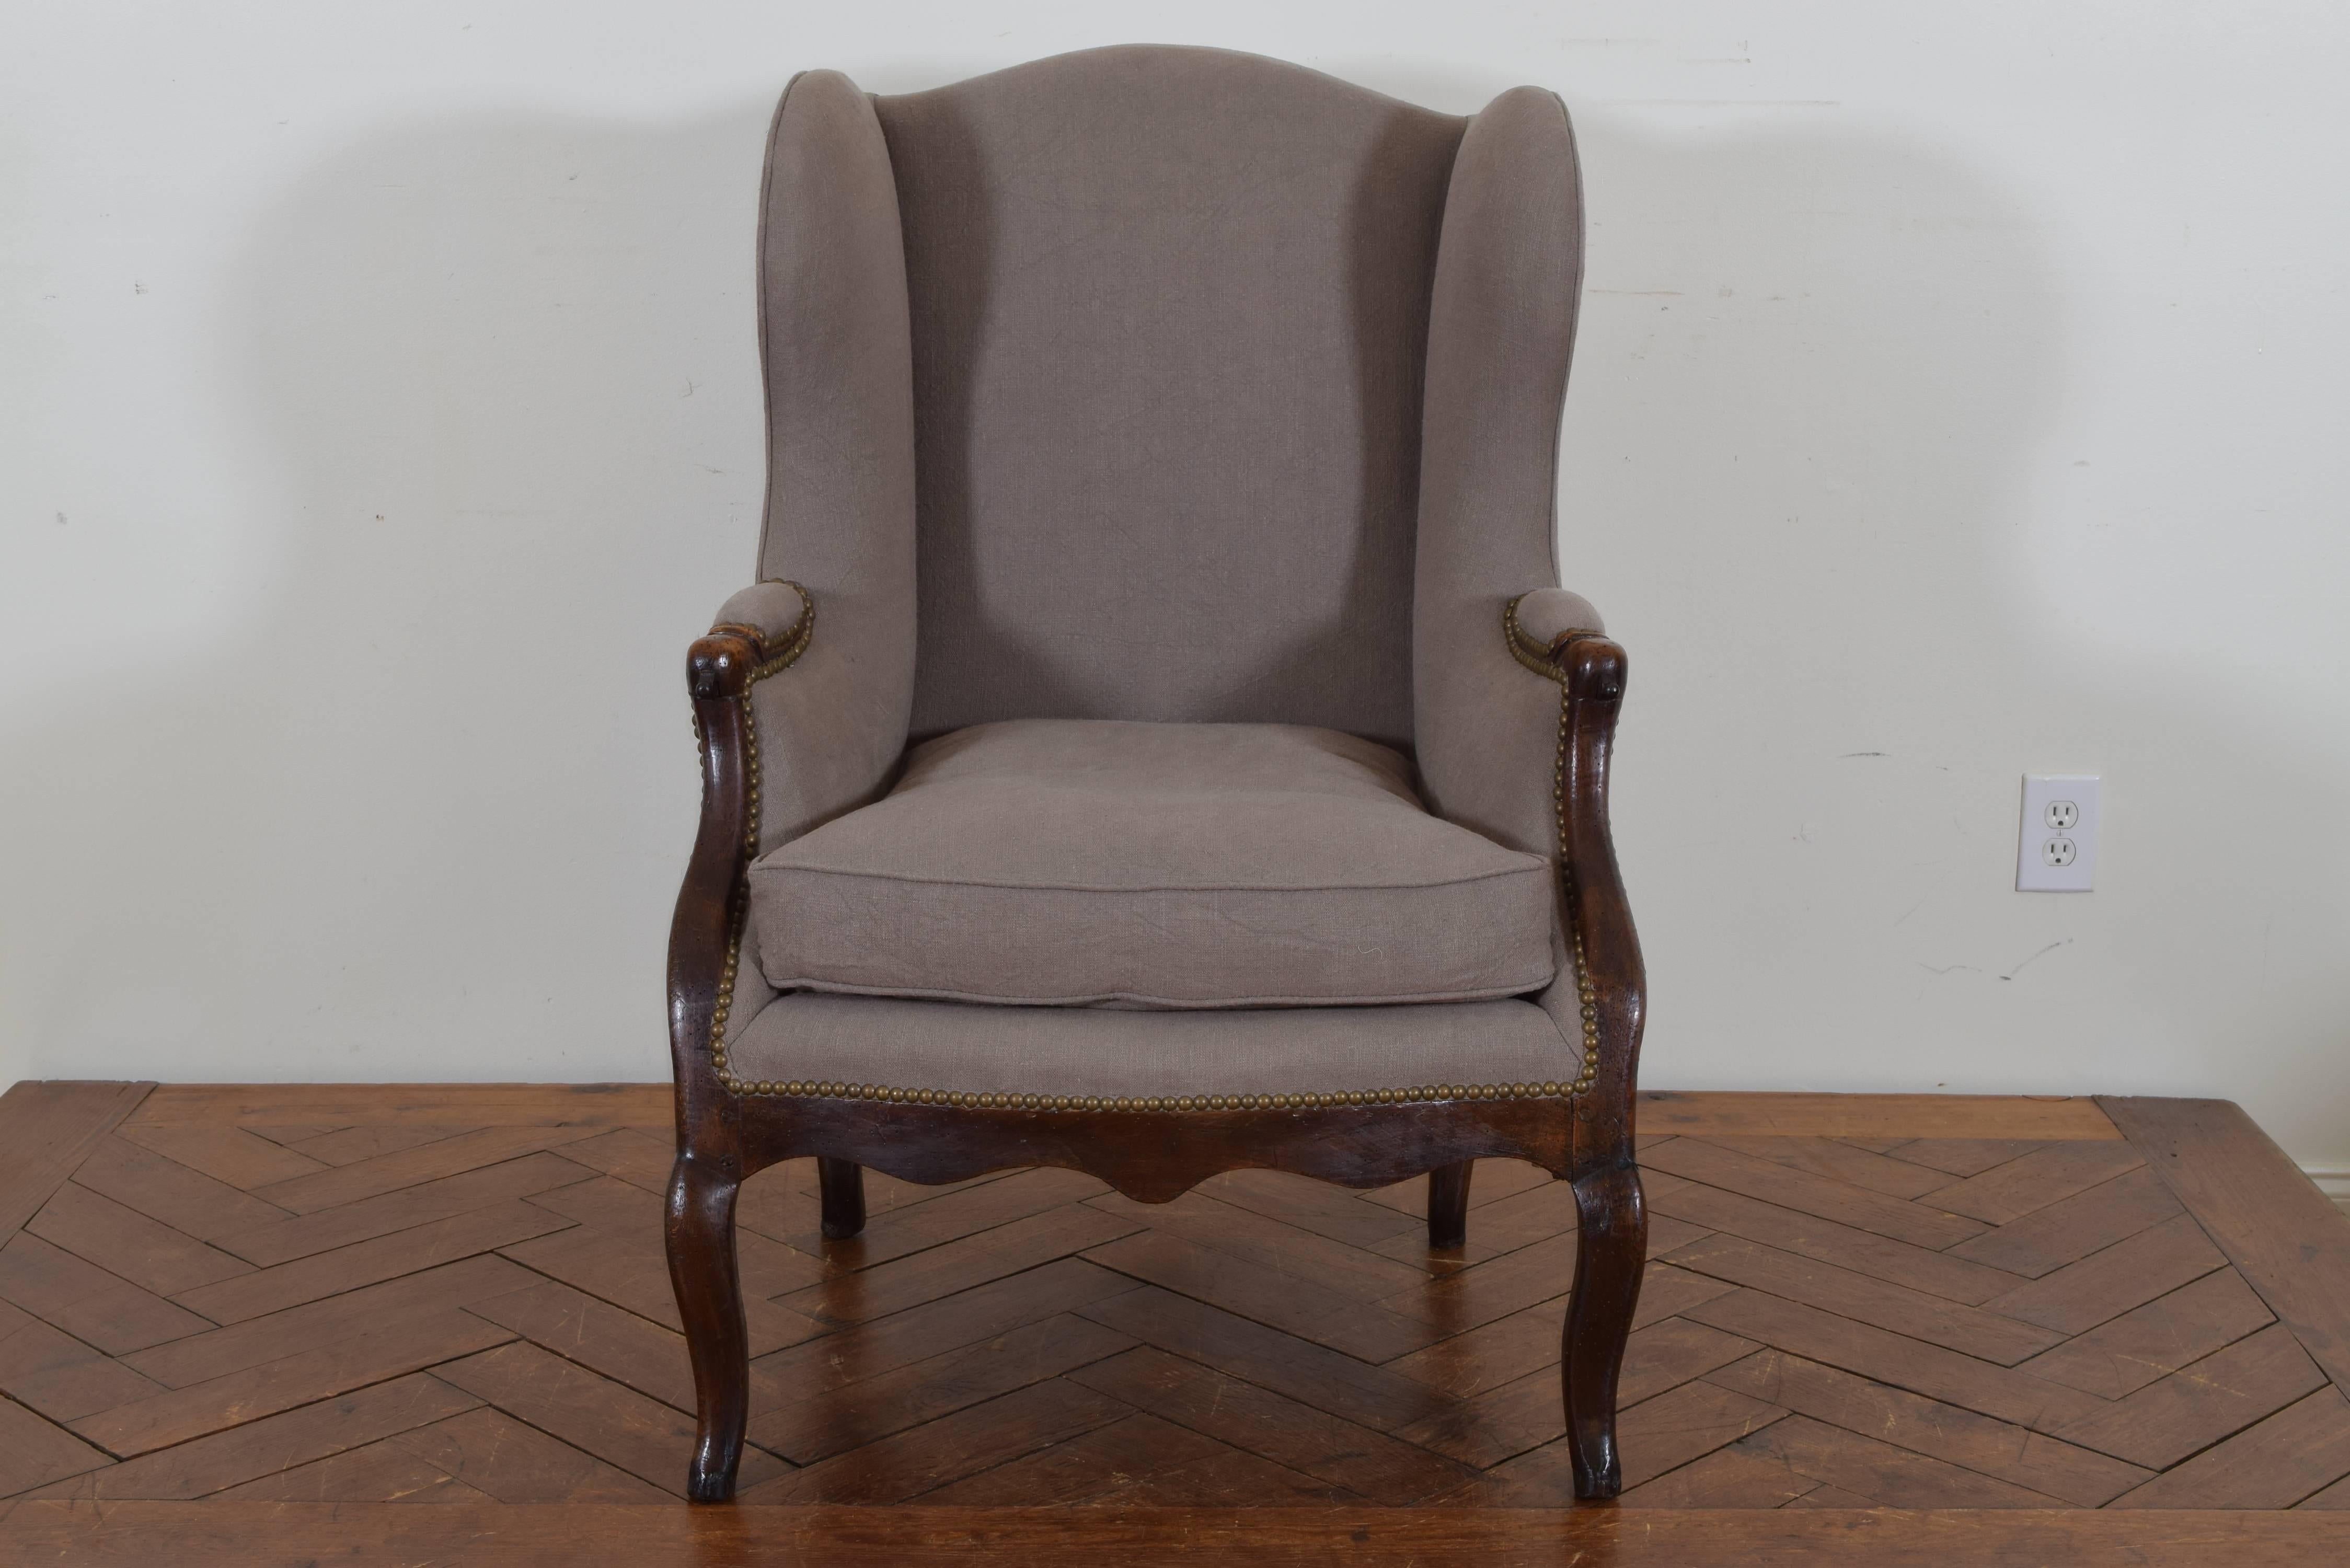 The arched backrest and shaped wings upholstered in a grey linen and trimmed in patinated brass nailheads, the shaped arms, legs and apron in walnut, with iron slides in the arms which would have supported a tray.